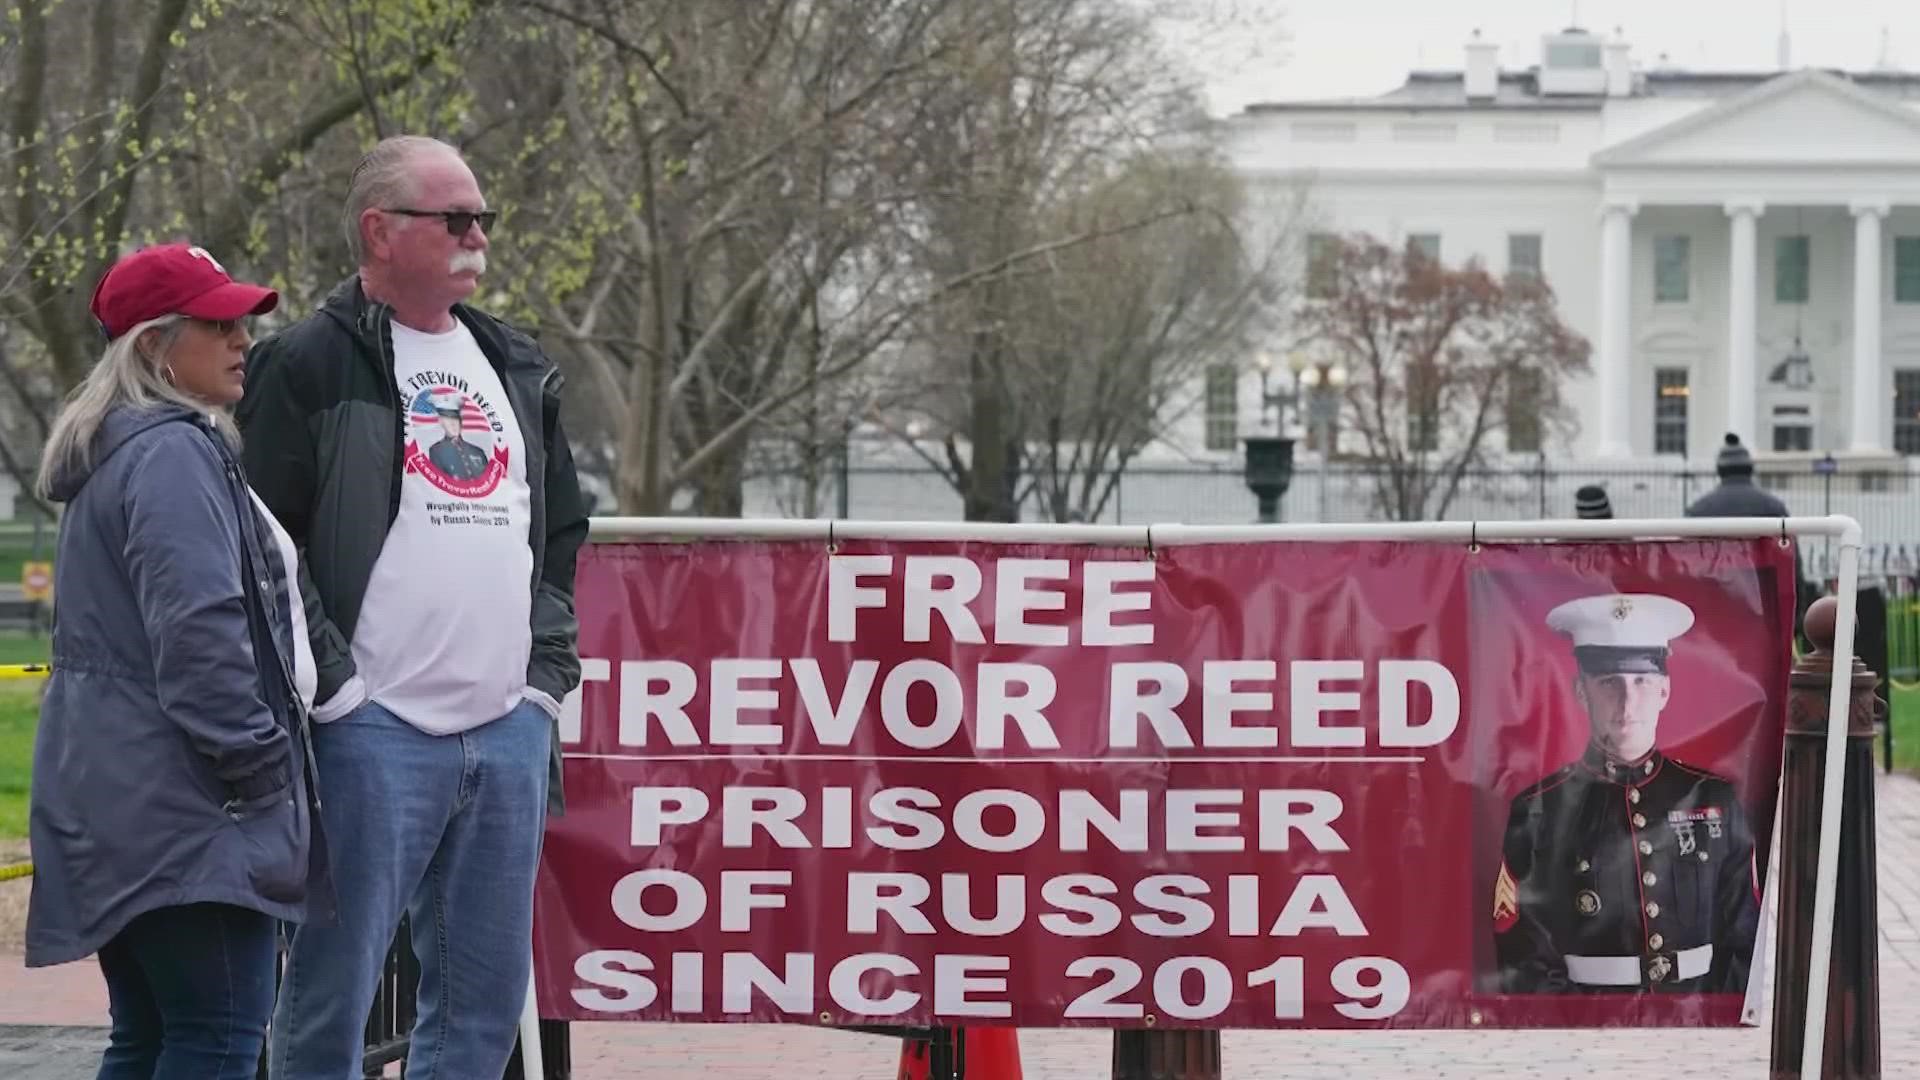 Trevor Reed's parents met in the Oval Office with President Joe Biden for 40 minutes after they held a protest outside of the White House.